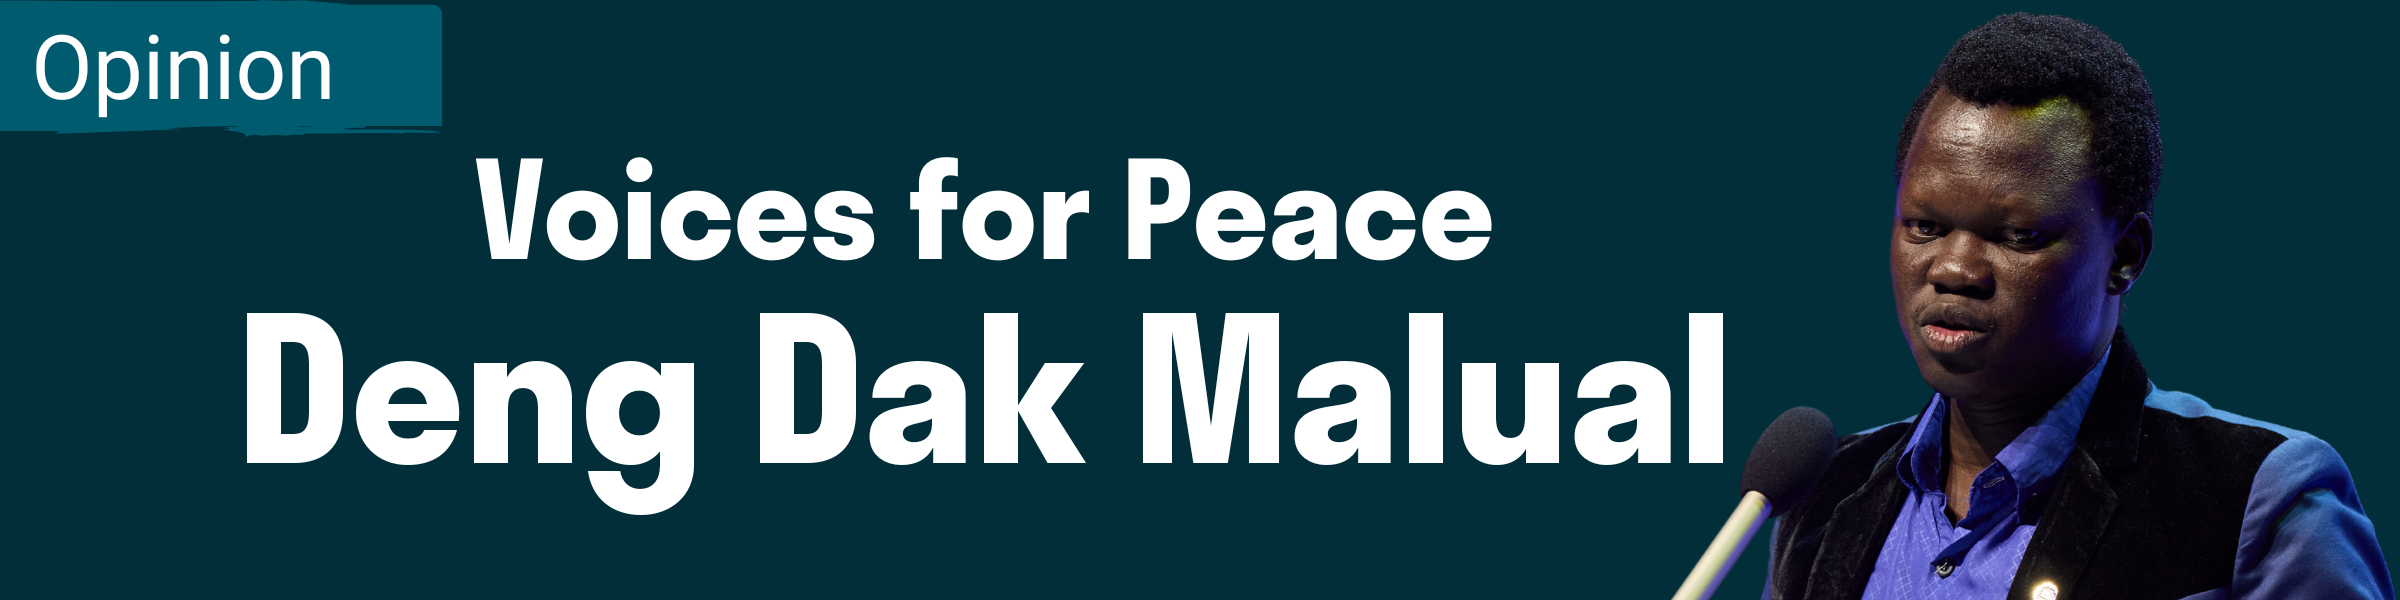 Banner for Deng Dak Malual Voices for Peace